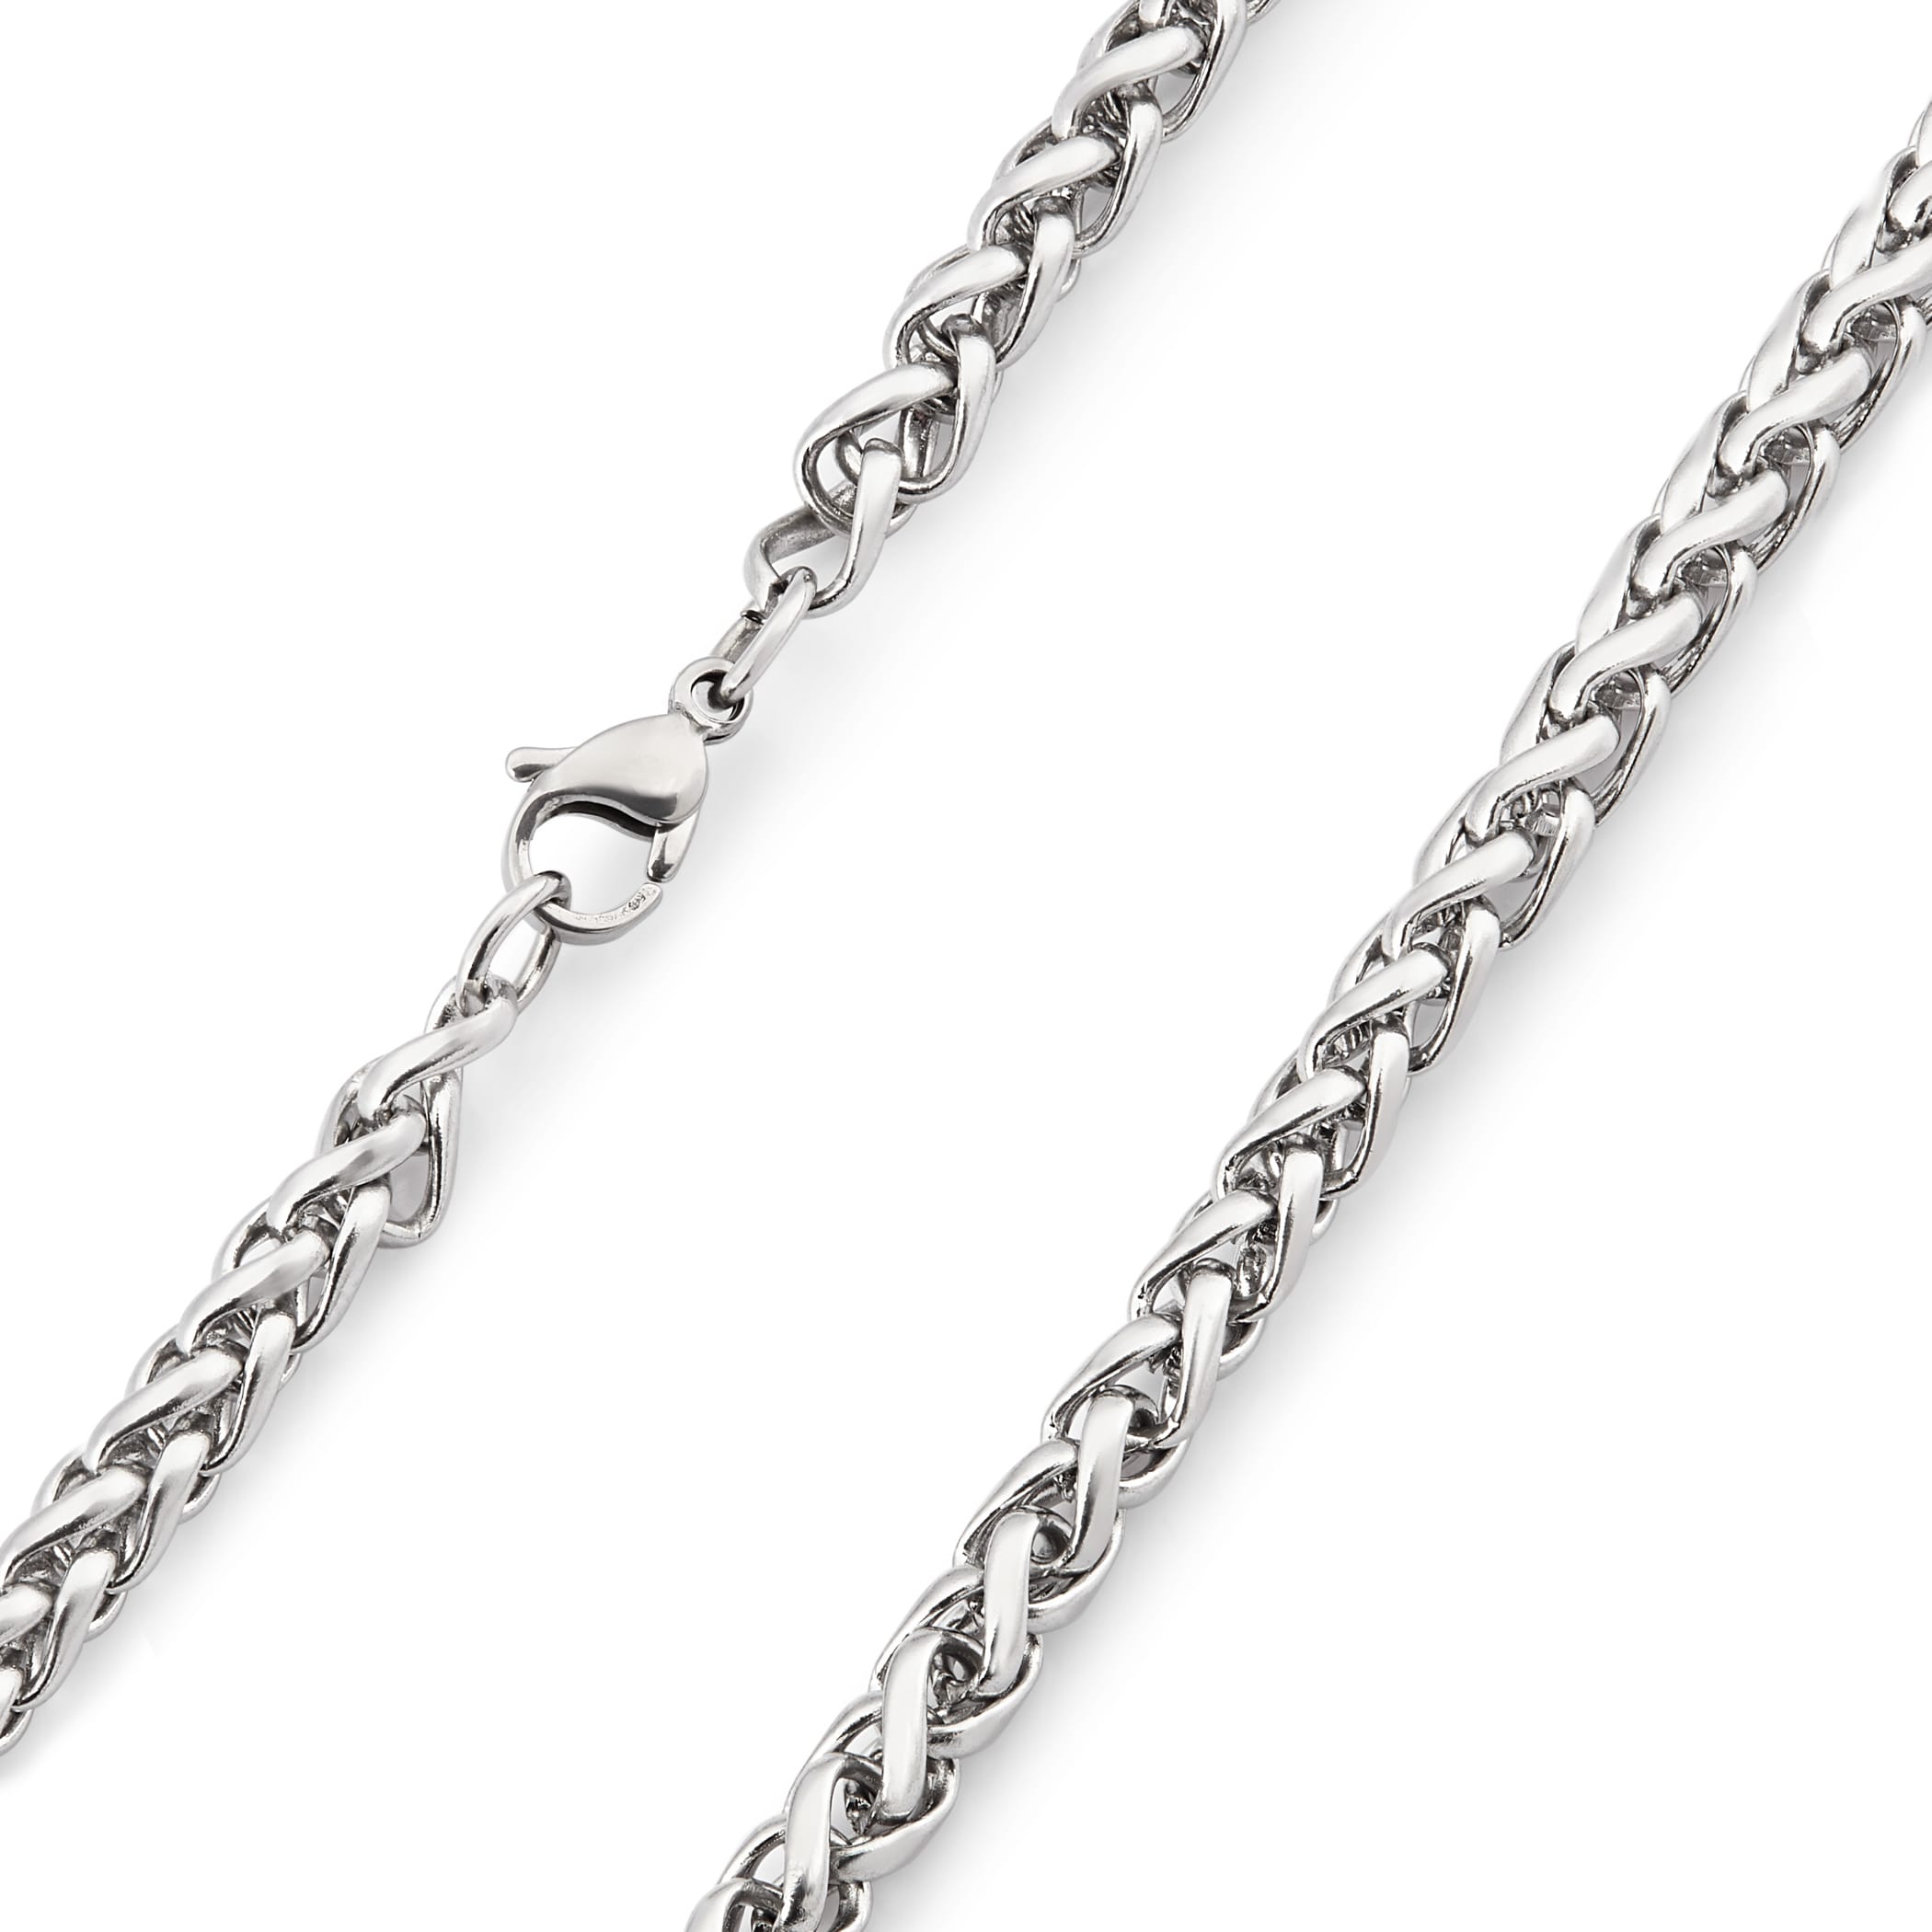 PriceRock Sterling Silver Spiga Chain Necklace 18 Inches 